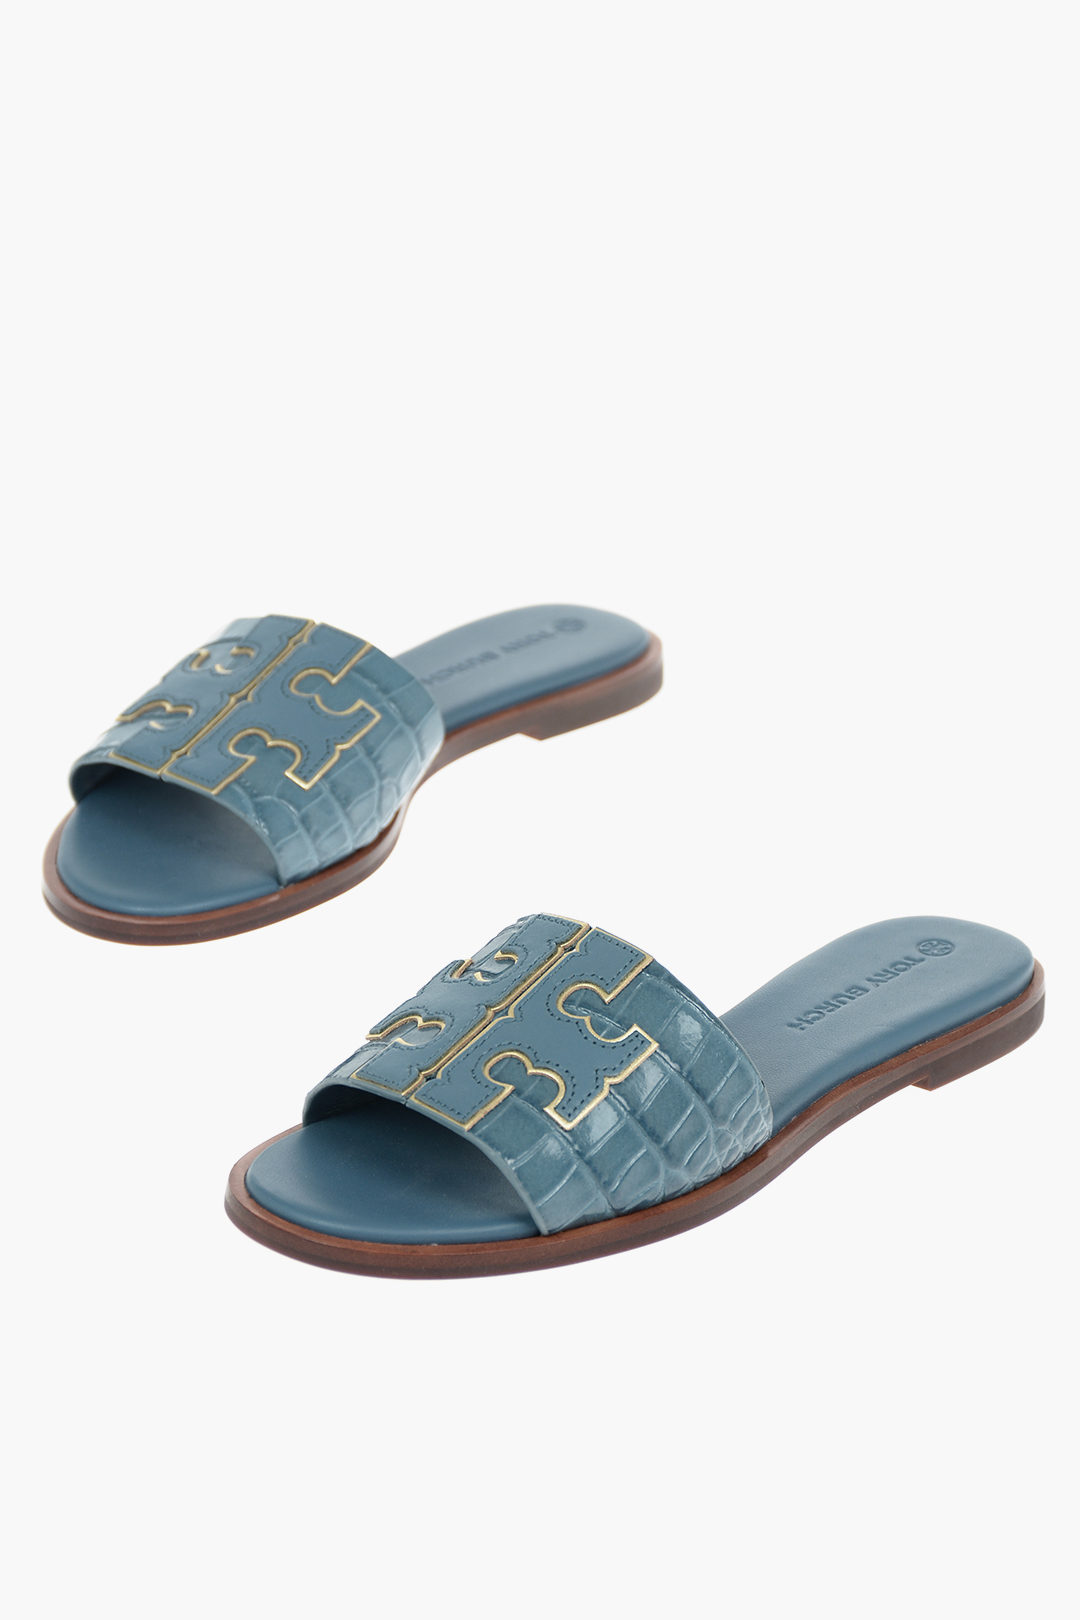 Tory Burch Crocodile Effect Leather Slippers with Lurex Details women -  Glamood Outlet